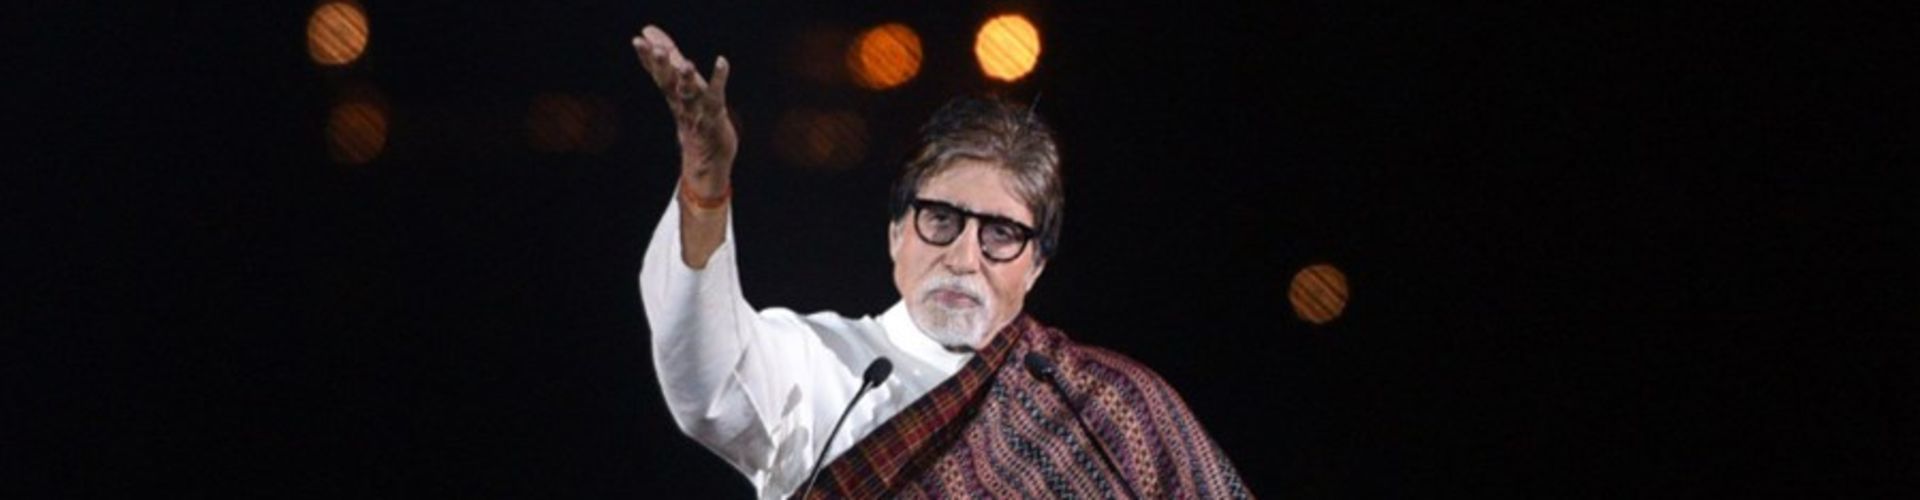 Amitabh Bachchan urges everyone to be united to give a fearless life to the future generation